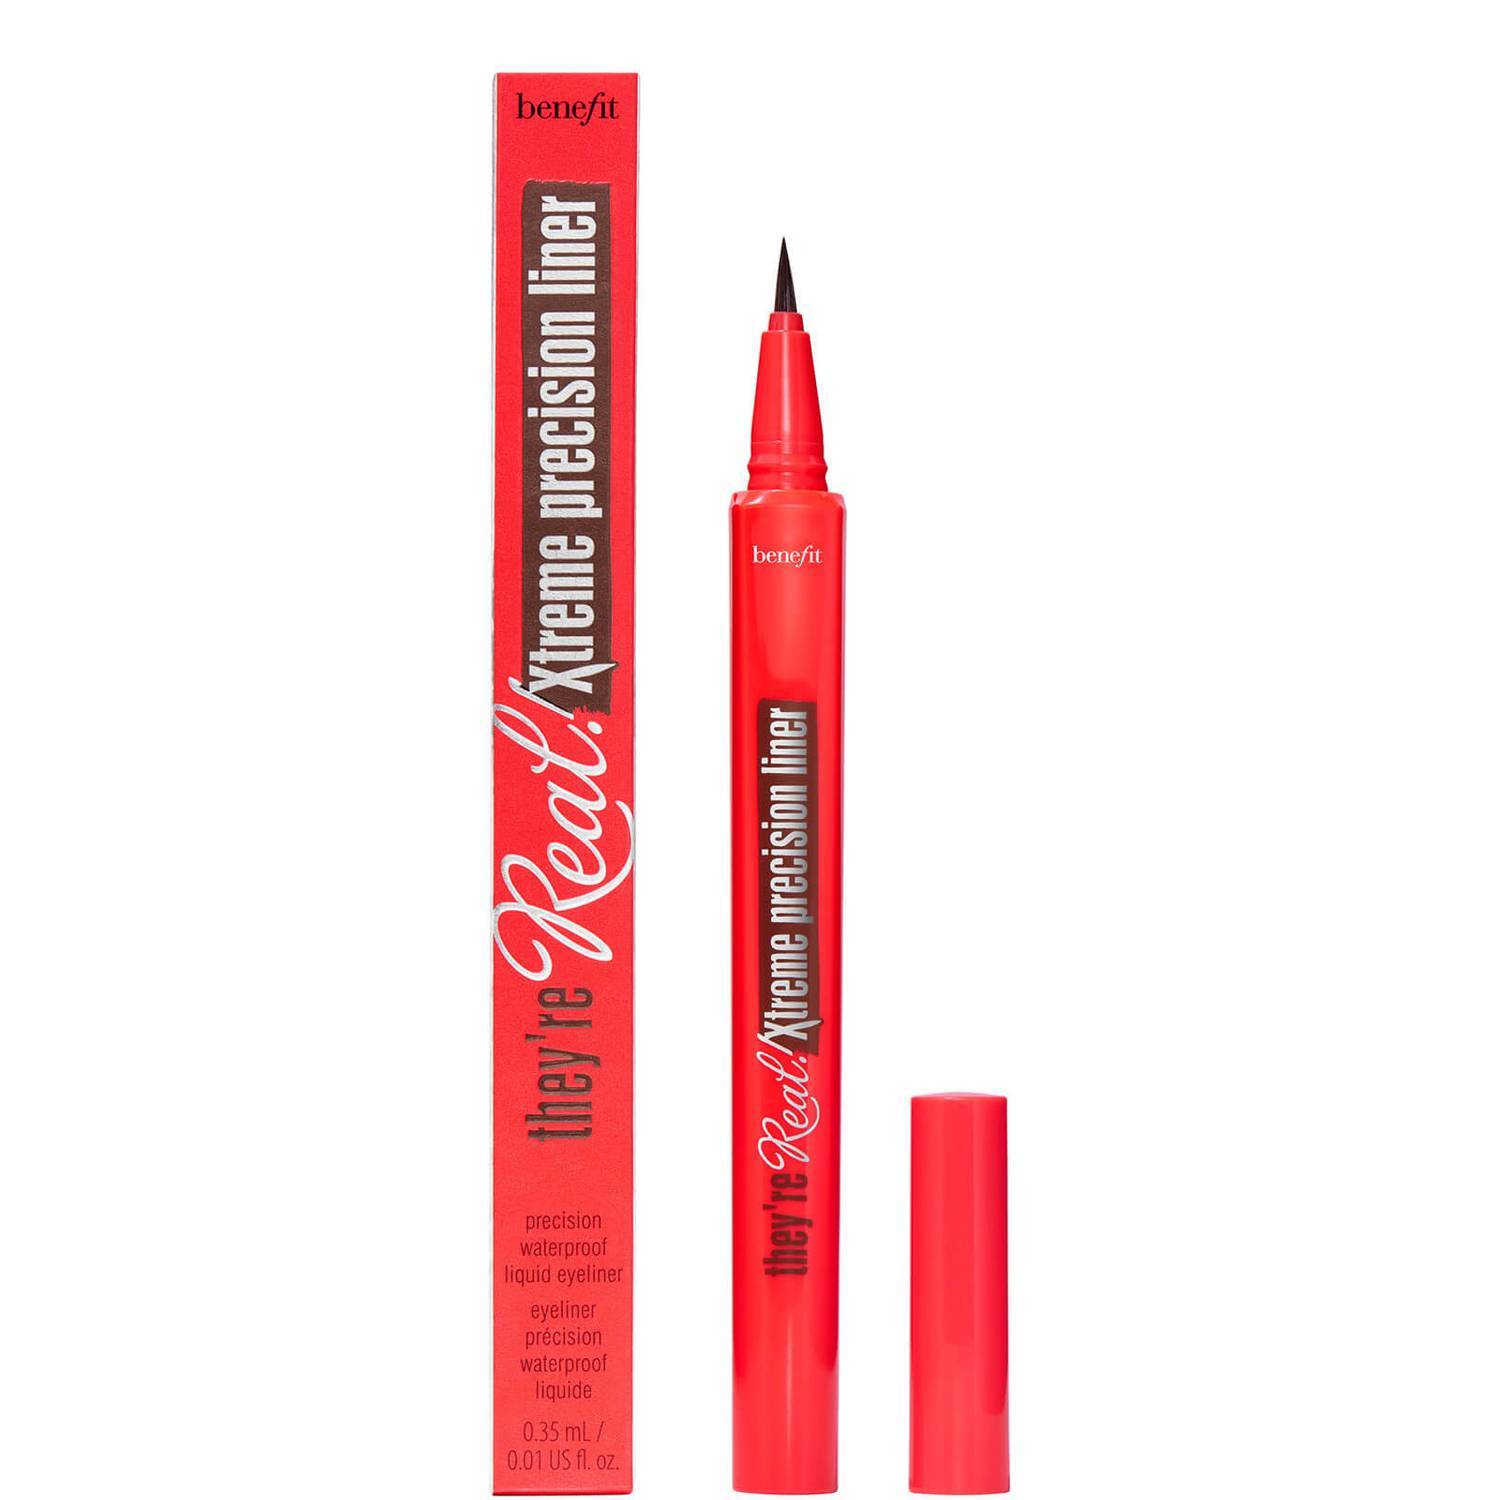 Benefit Cosmetics They're Real Xtreme Precision Waterproof Liquid Eyeliner Xtra Black